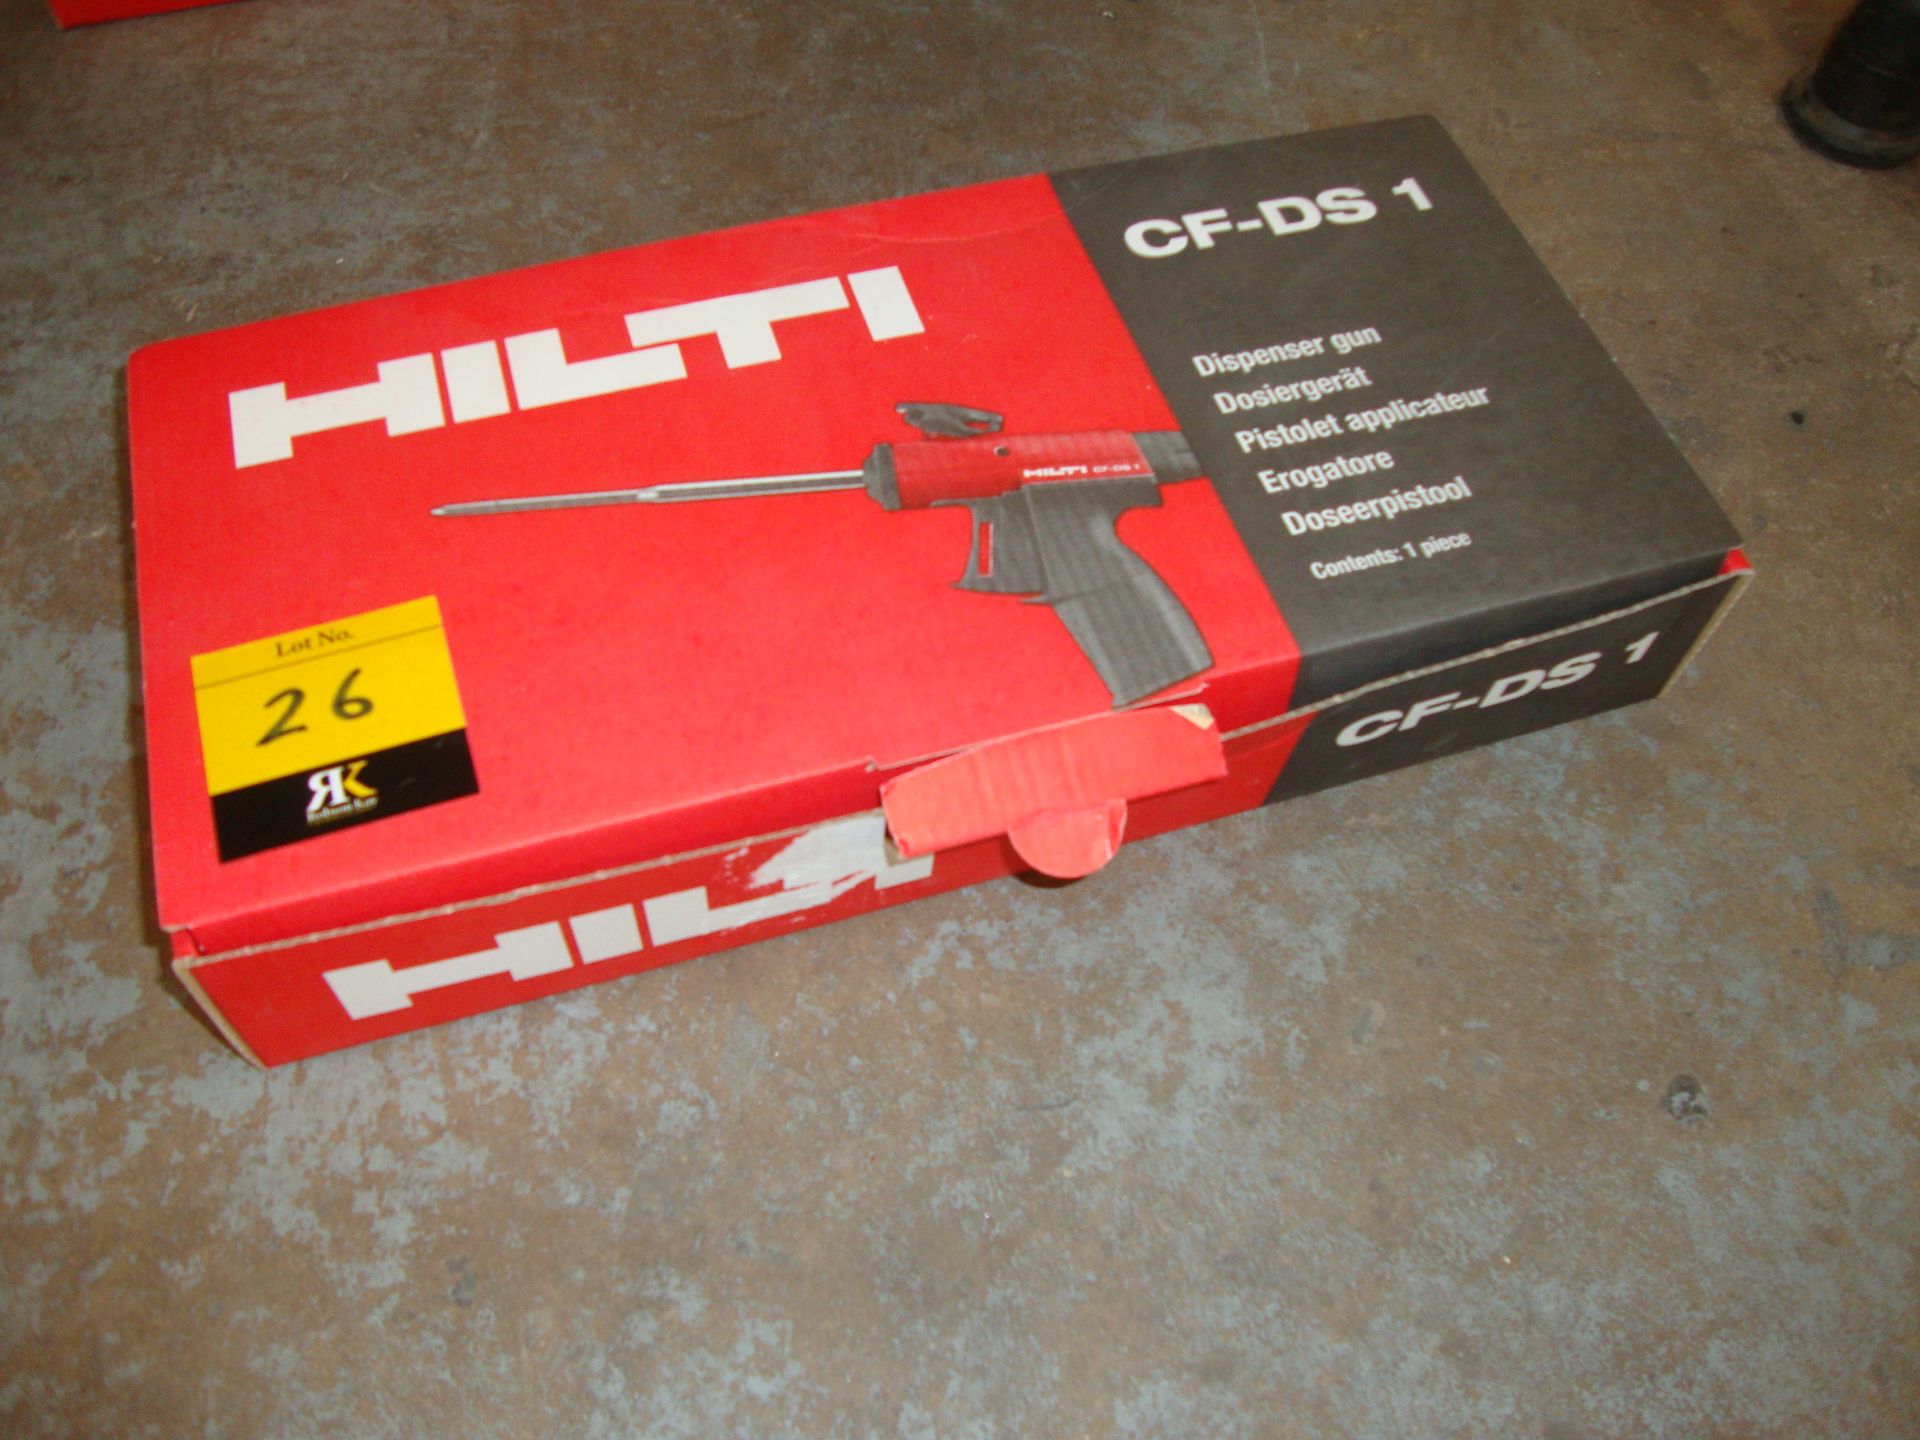 Hilti model CF-DS1 dispenser gun - appears unused. Includes box and instruction booklet/manual